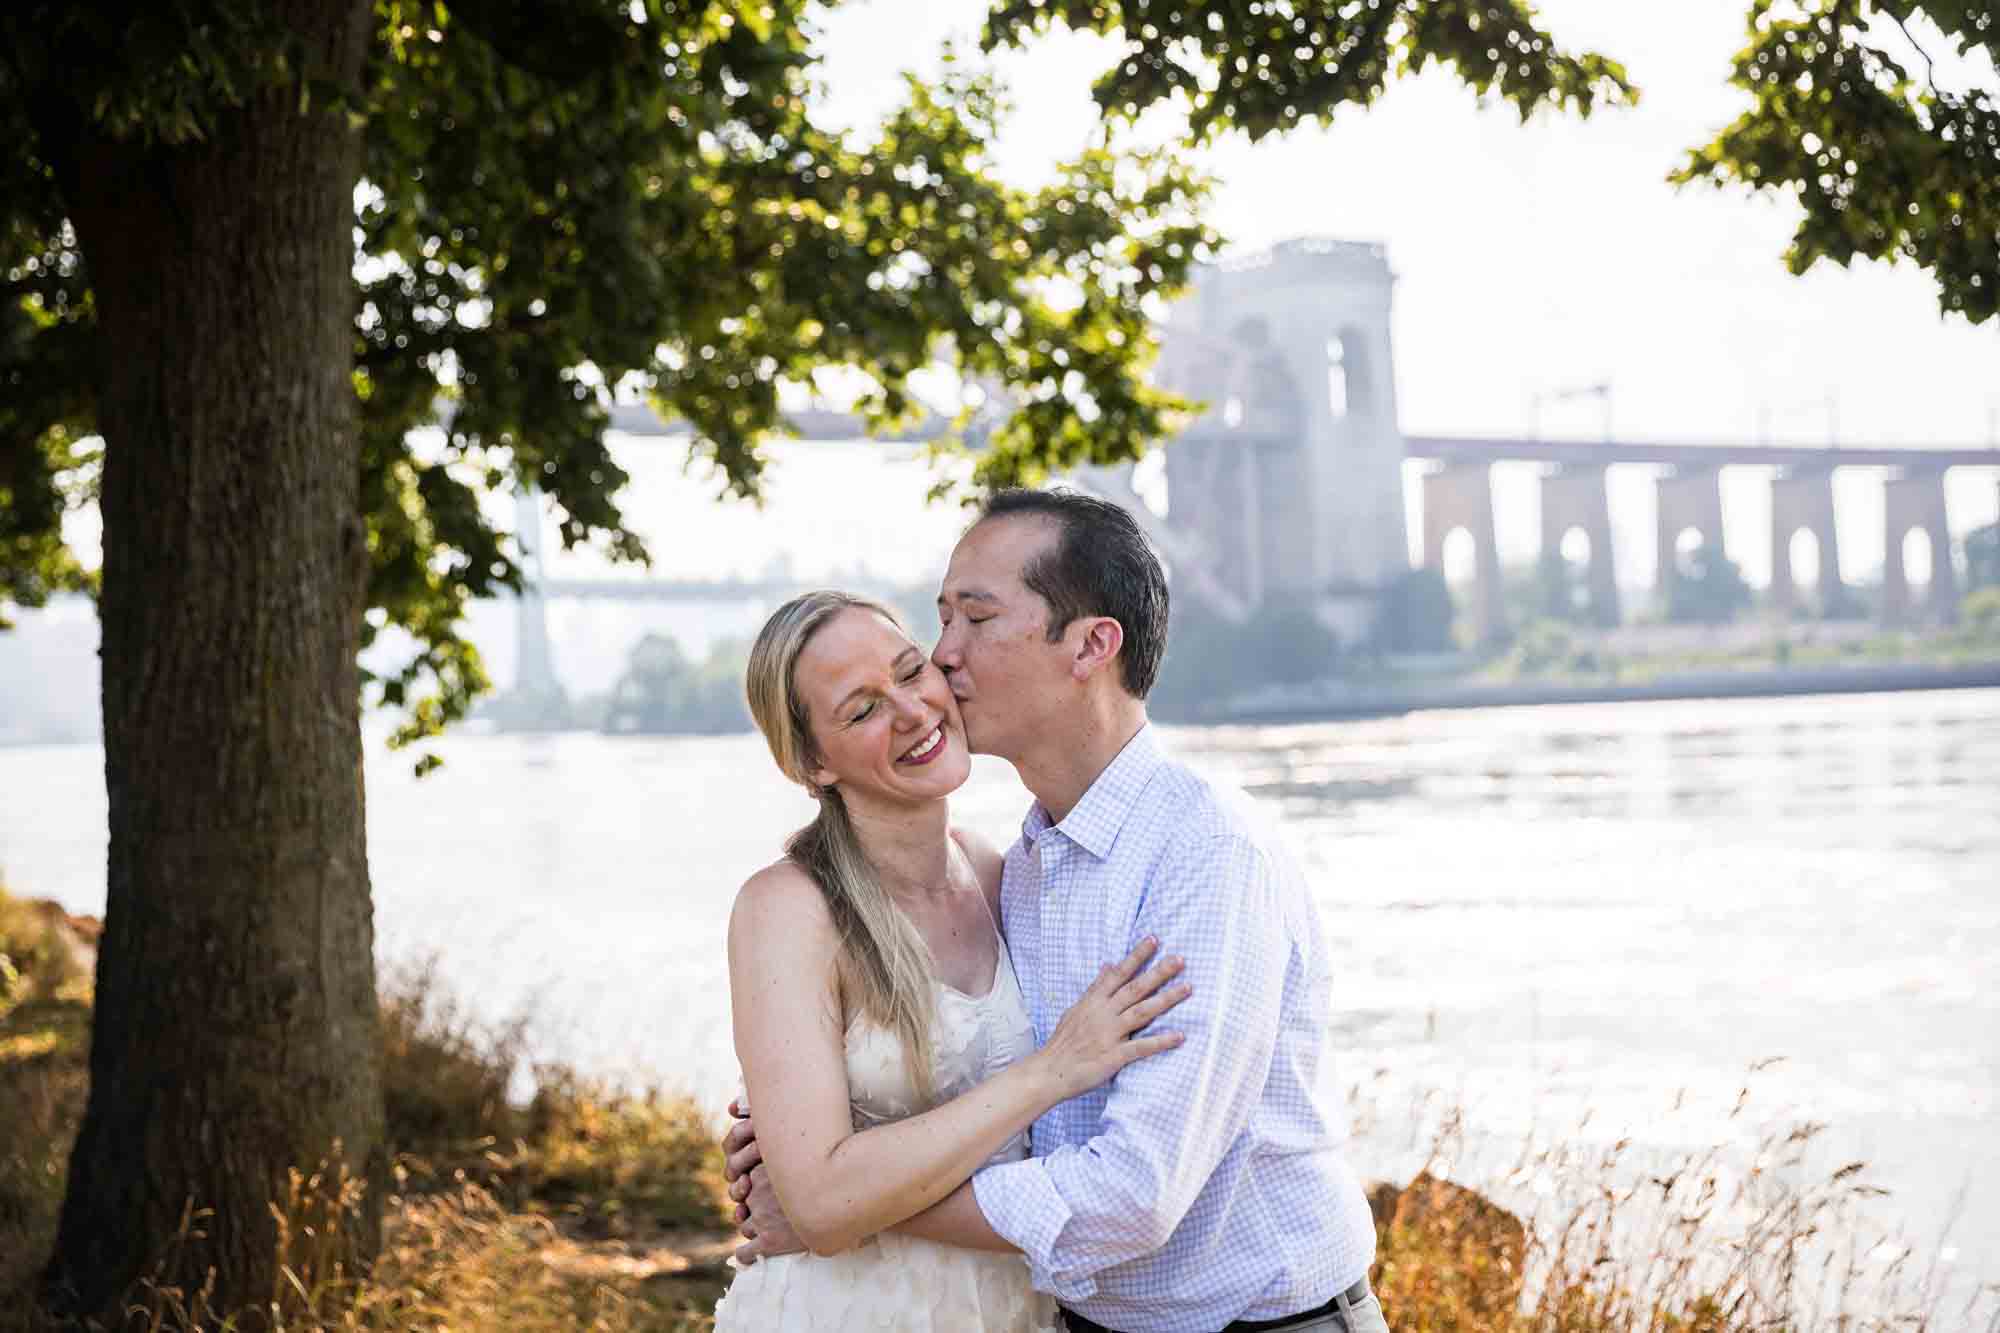 Astoria Park engagement photos of a man kissing woman on the cheek along waterfront